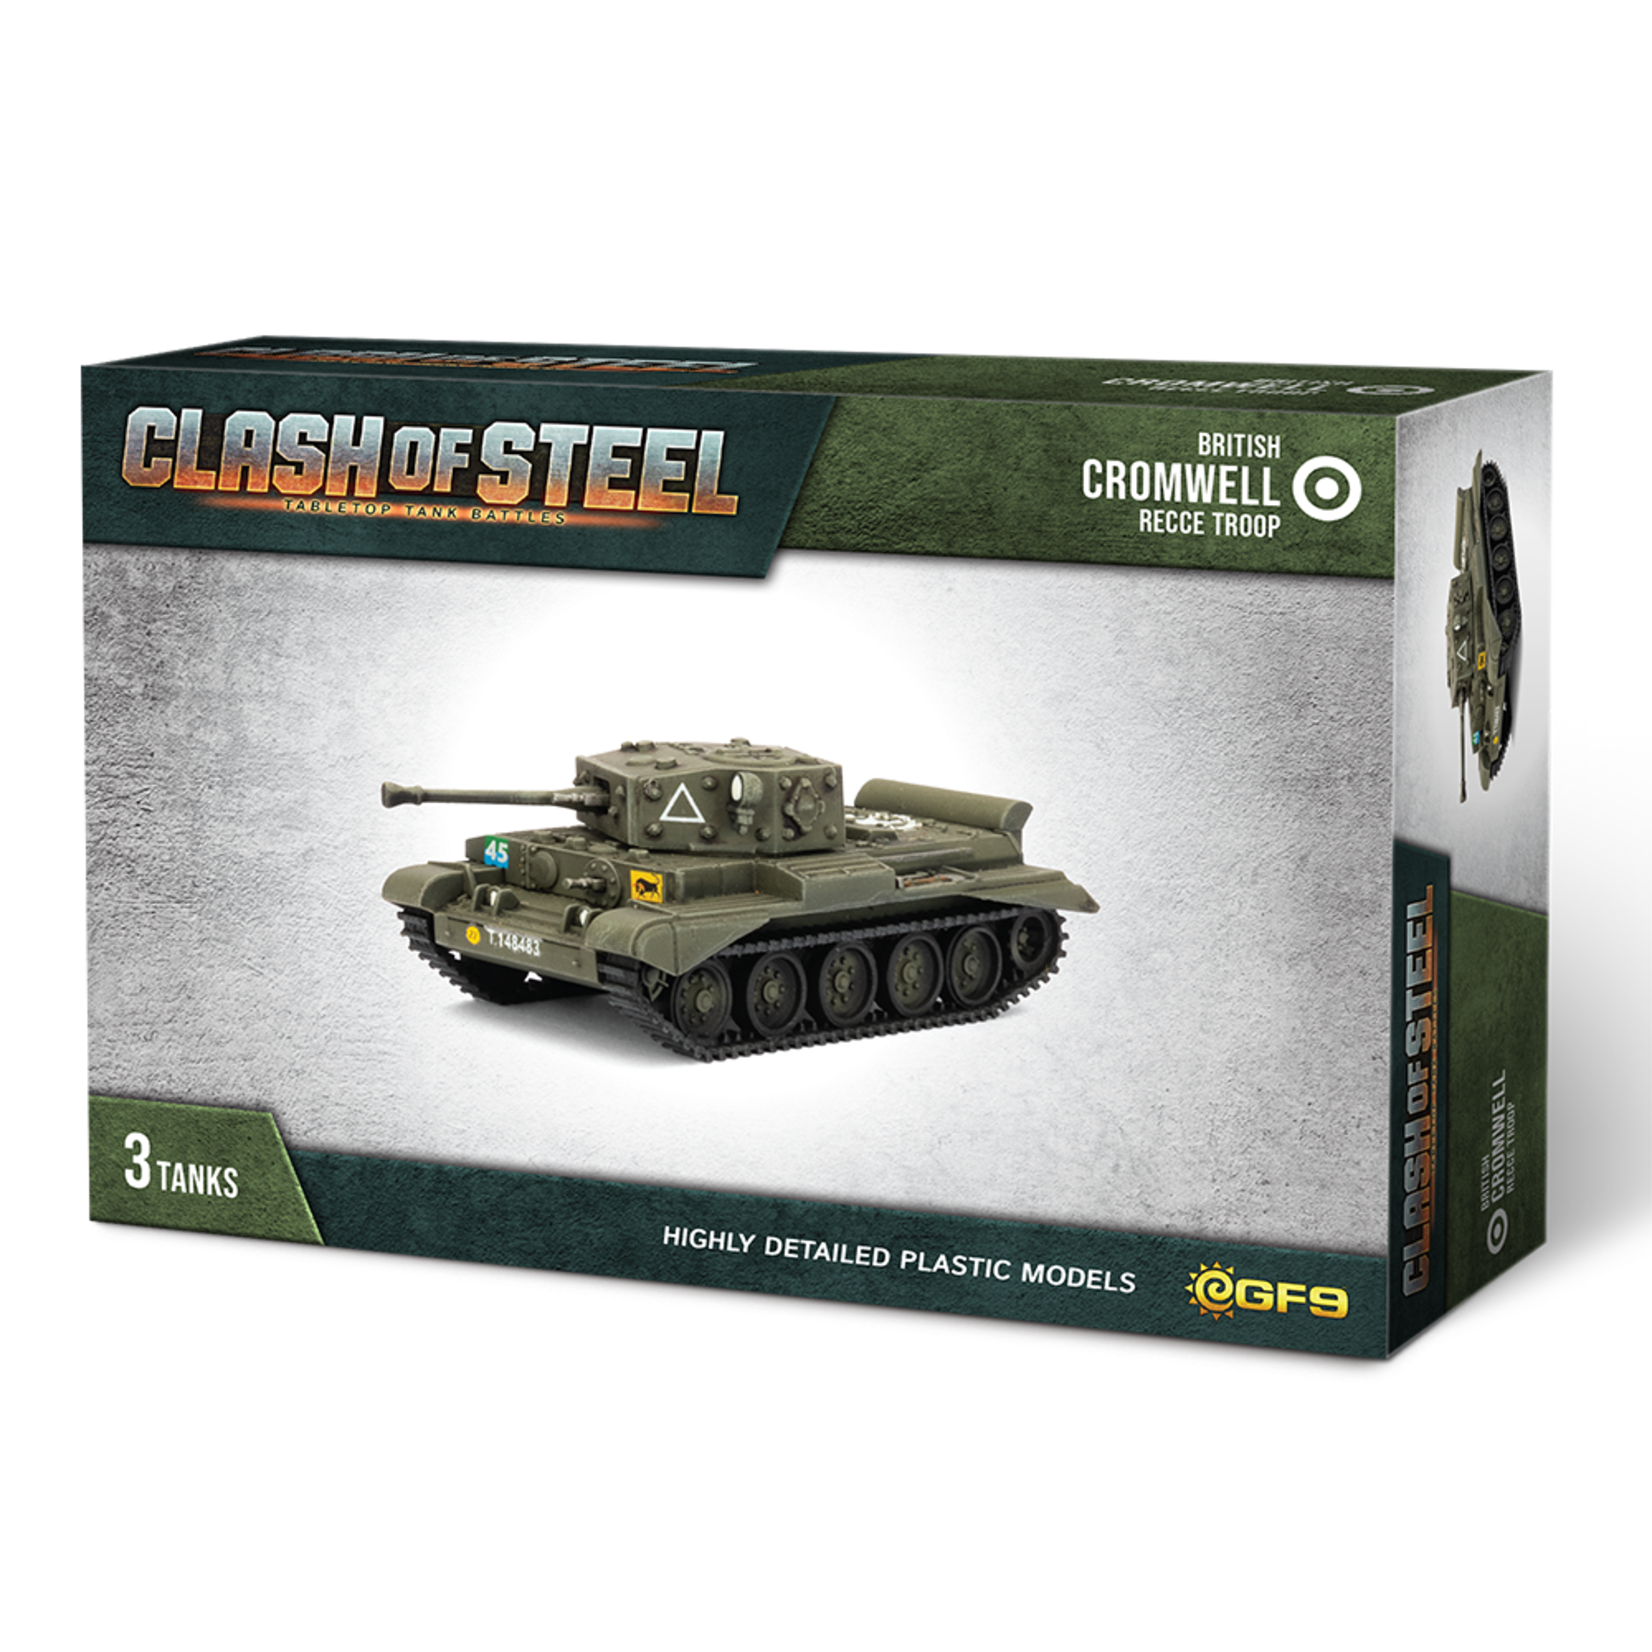 Battlefront Miniatures Clash of Steel Cromwell Recce Troop